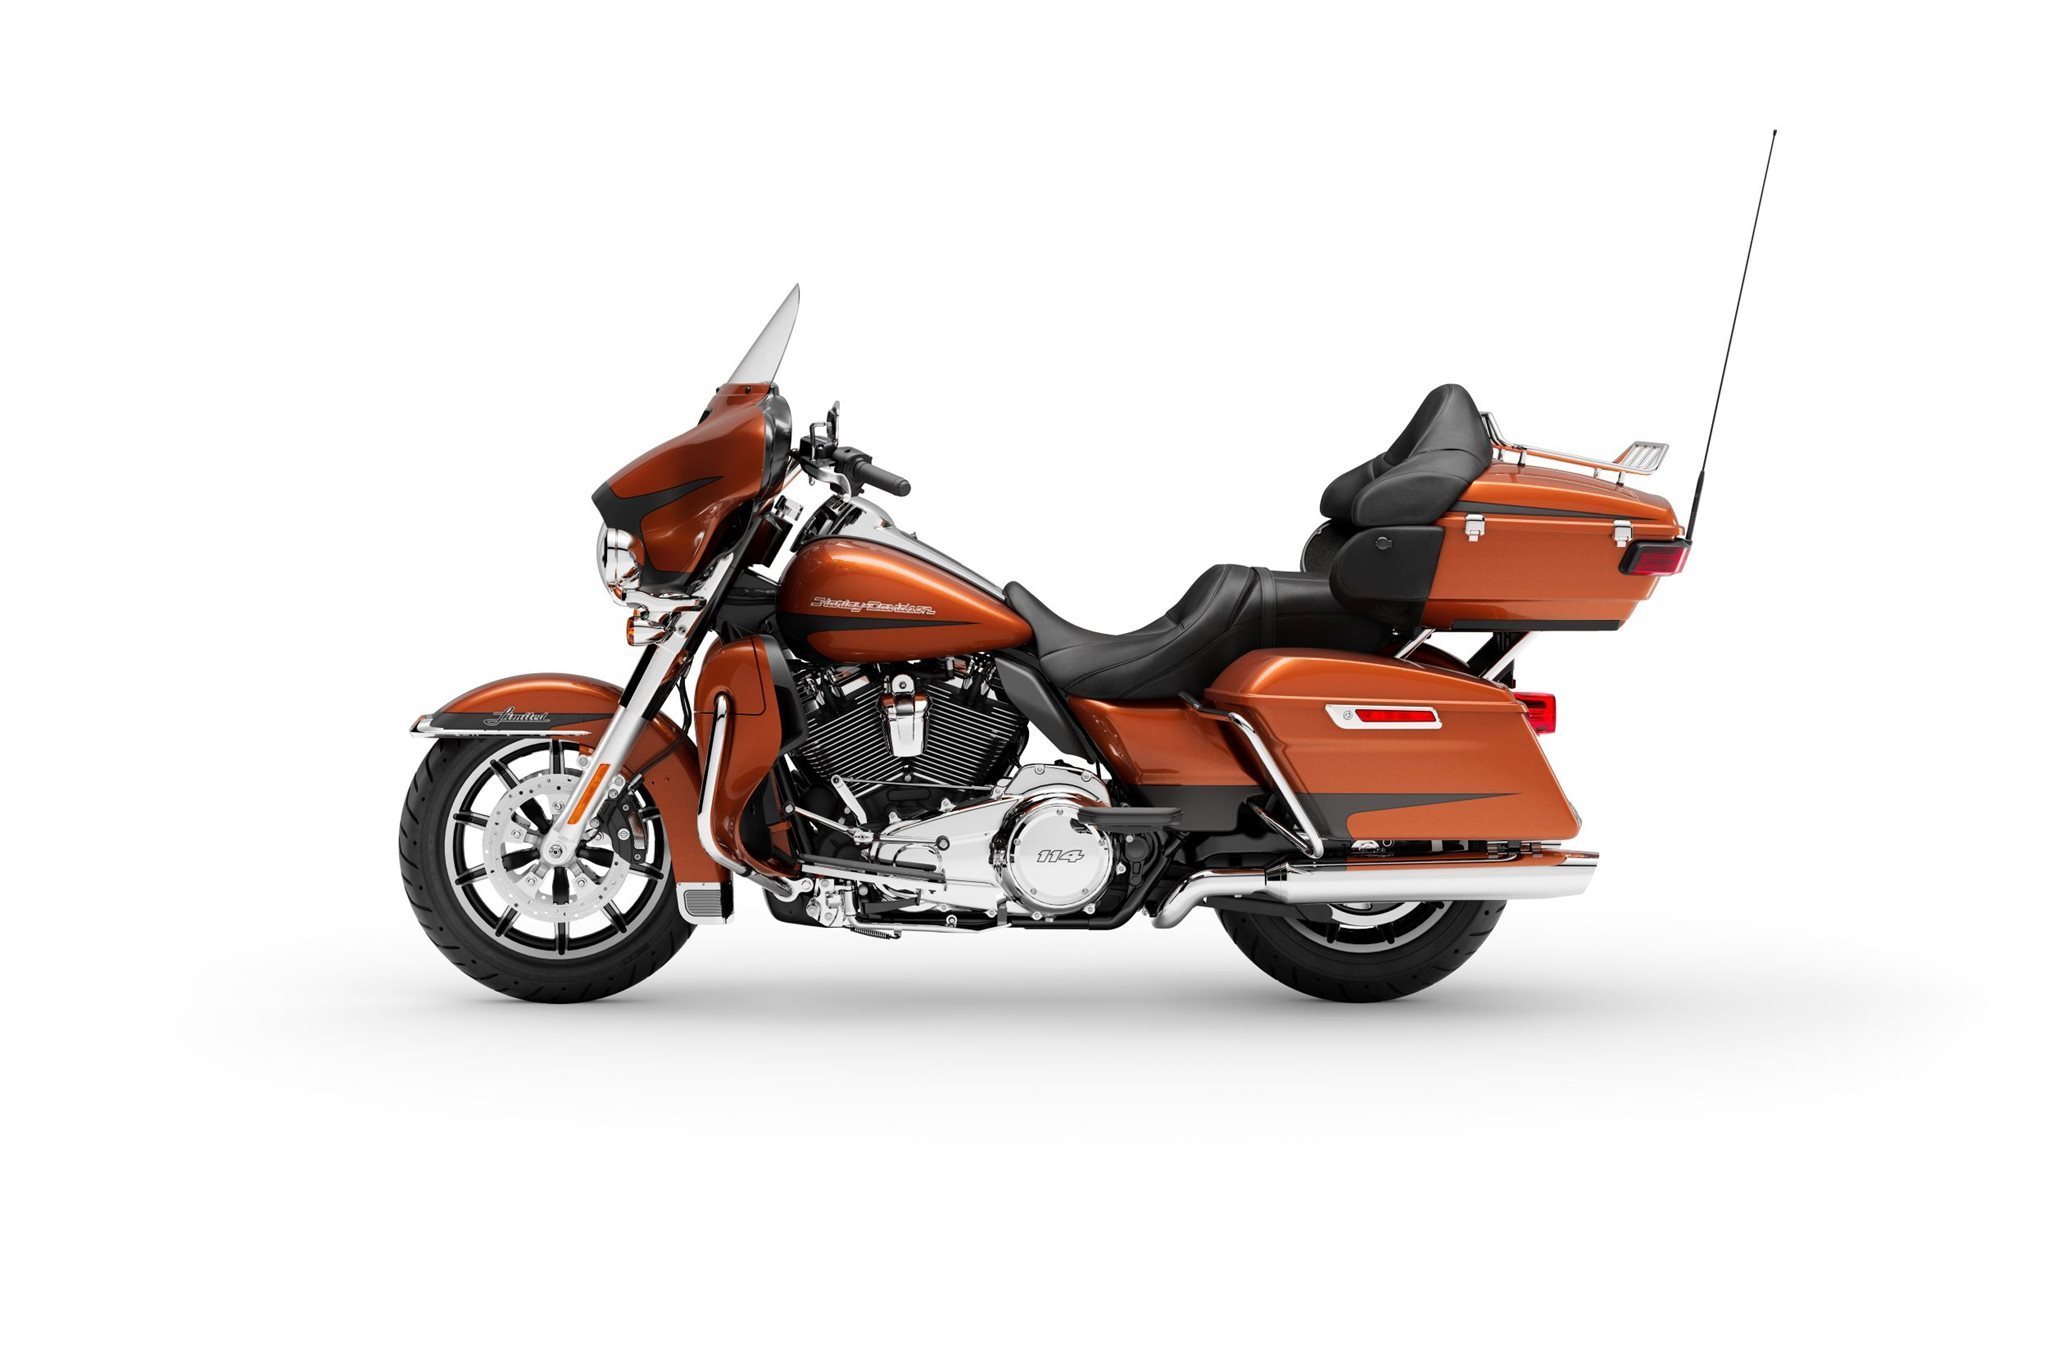 Harley Davidson India Country S Leading Premium Motorcycle Manufacturer Has Announced A Harley Davidson Cvo Harley Davidson Motorcycles Harley Davidson India